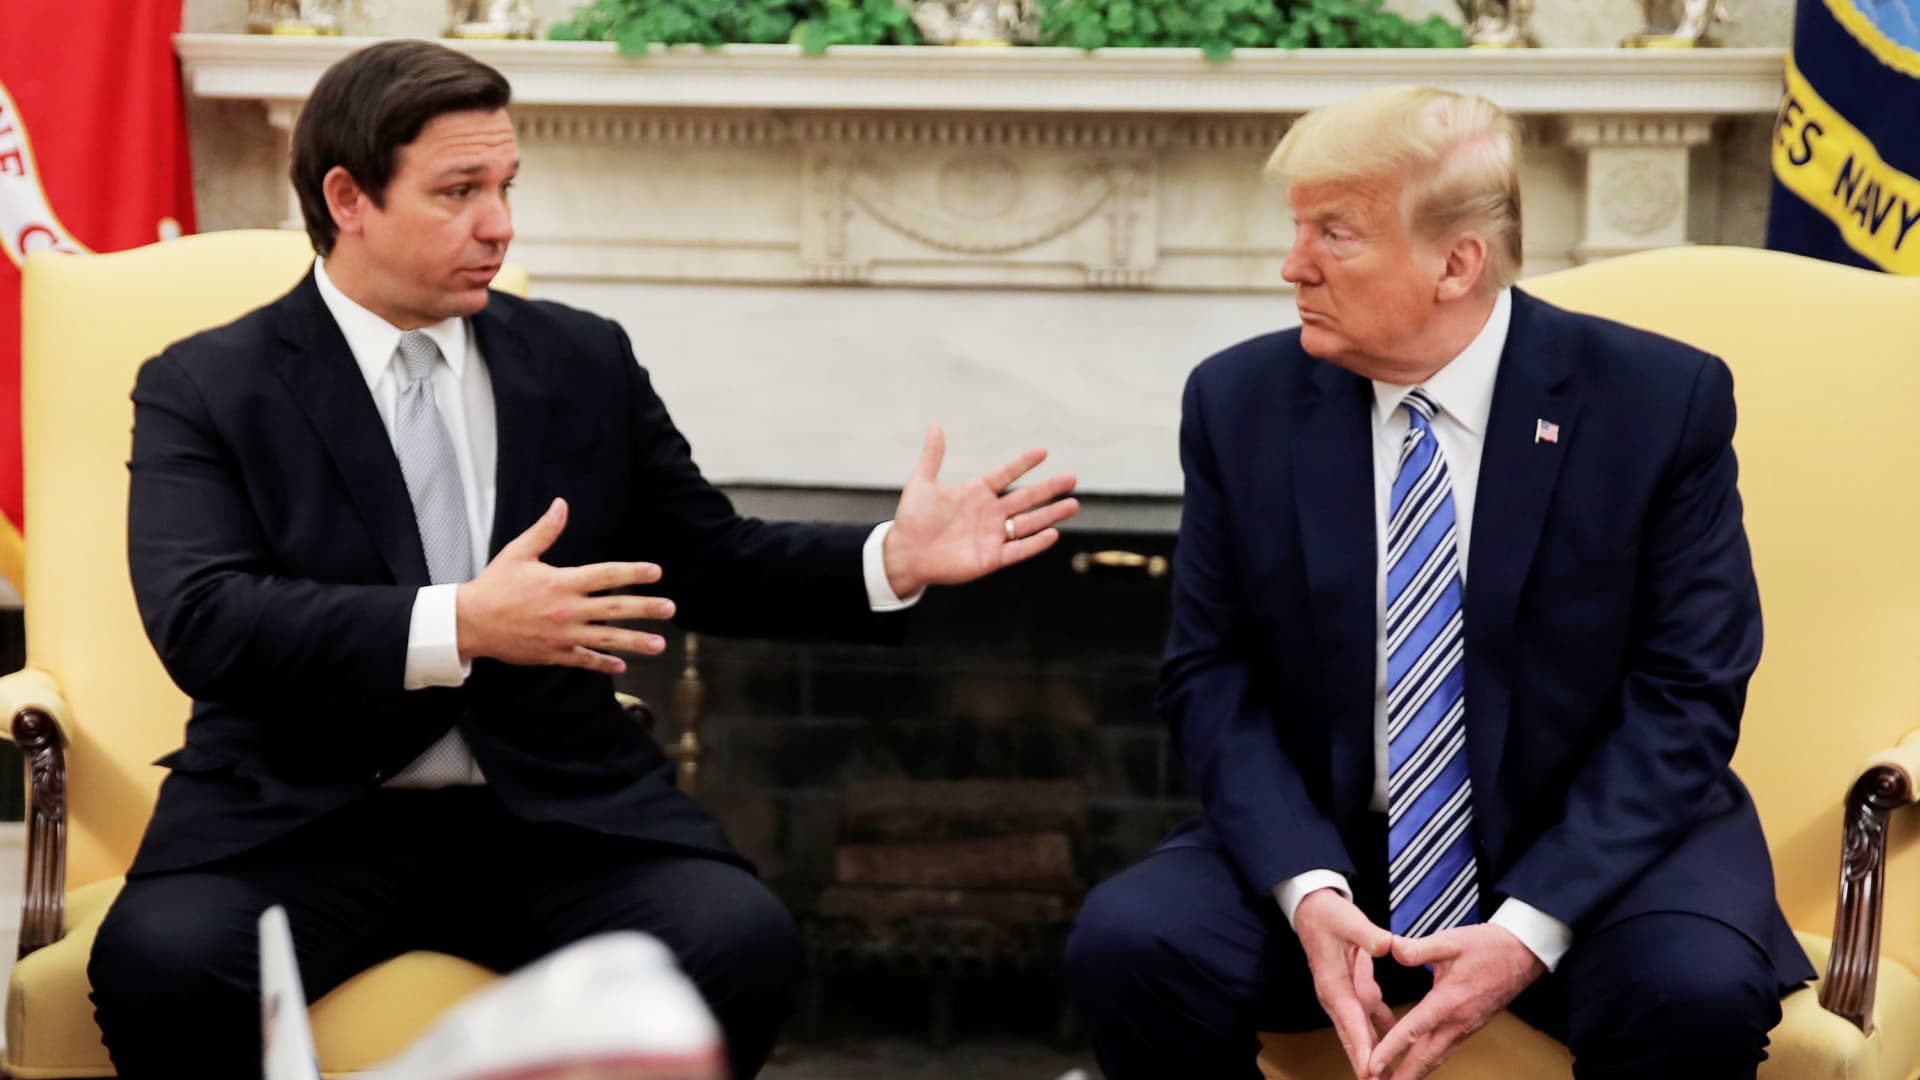 U.S. President Donald Trump listens to Florida Governor Ron DeSantis speak about the coronavirus response during a meeting in the Oval Office at the White House in Washington, U.S., April 28, 2020.